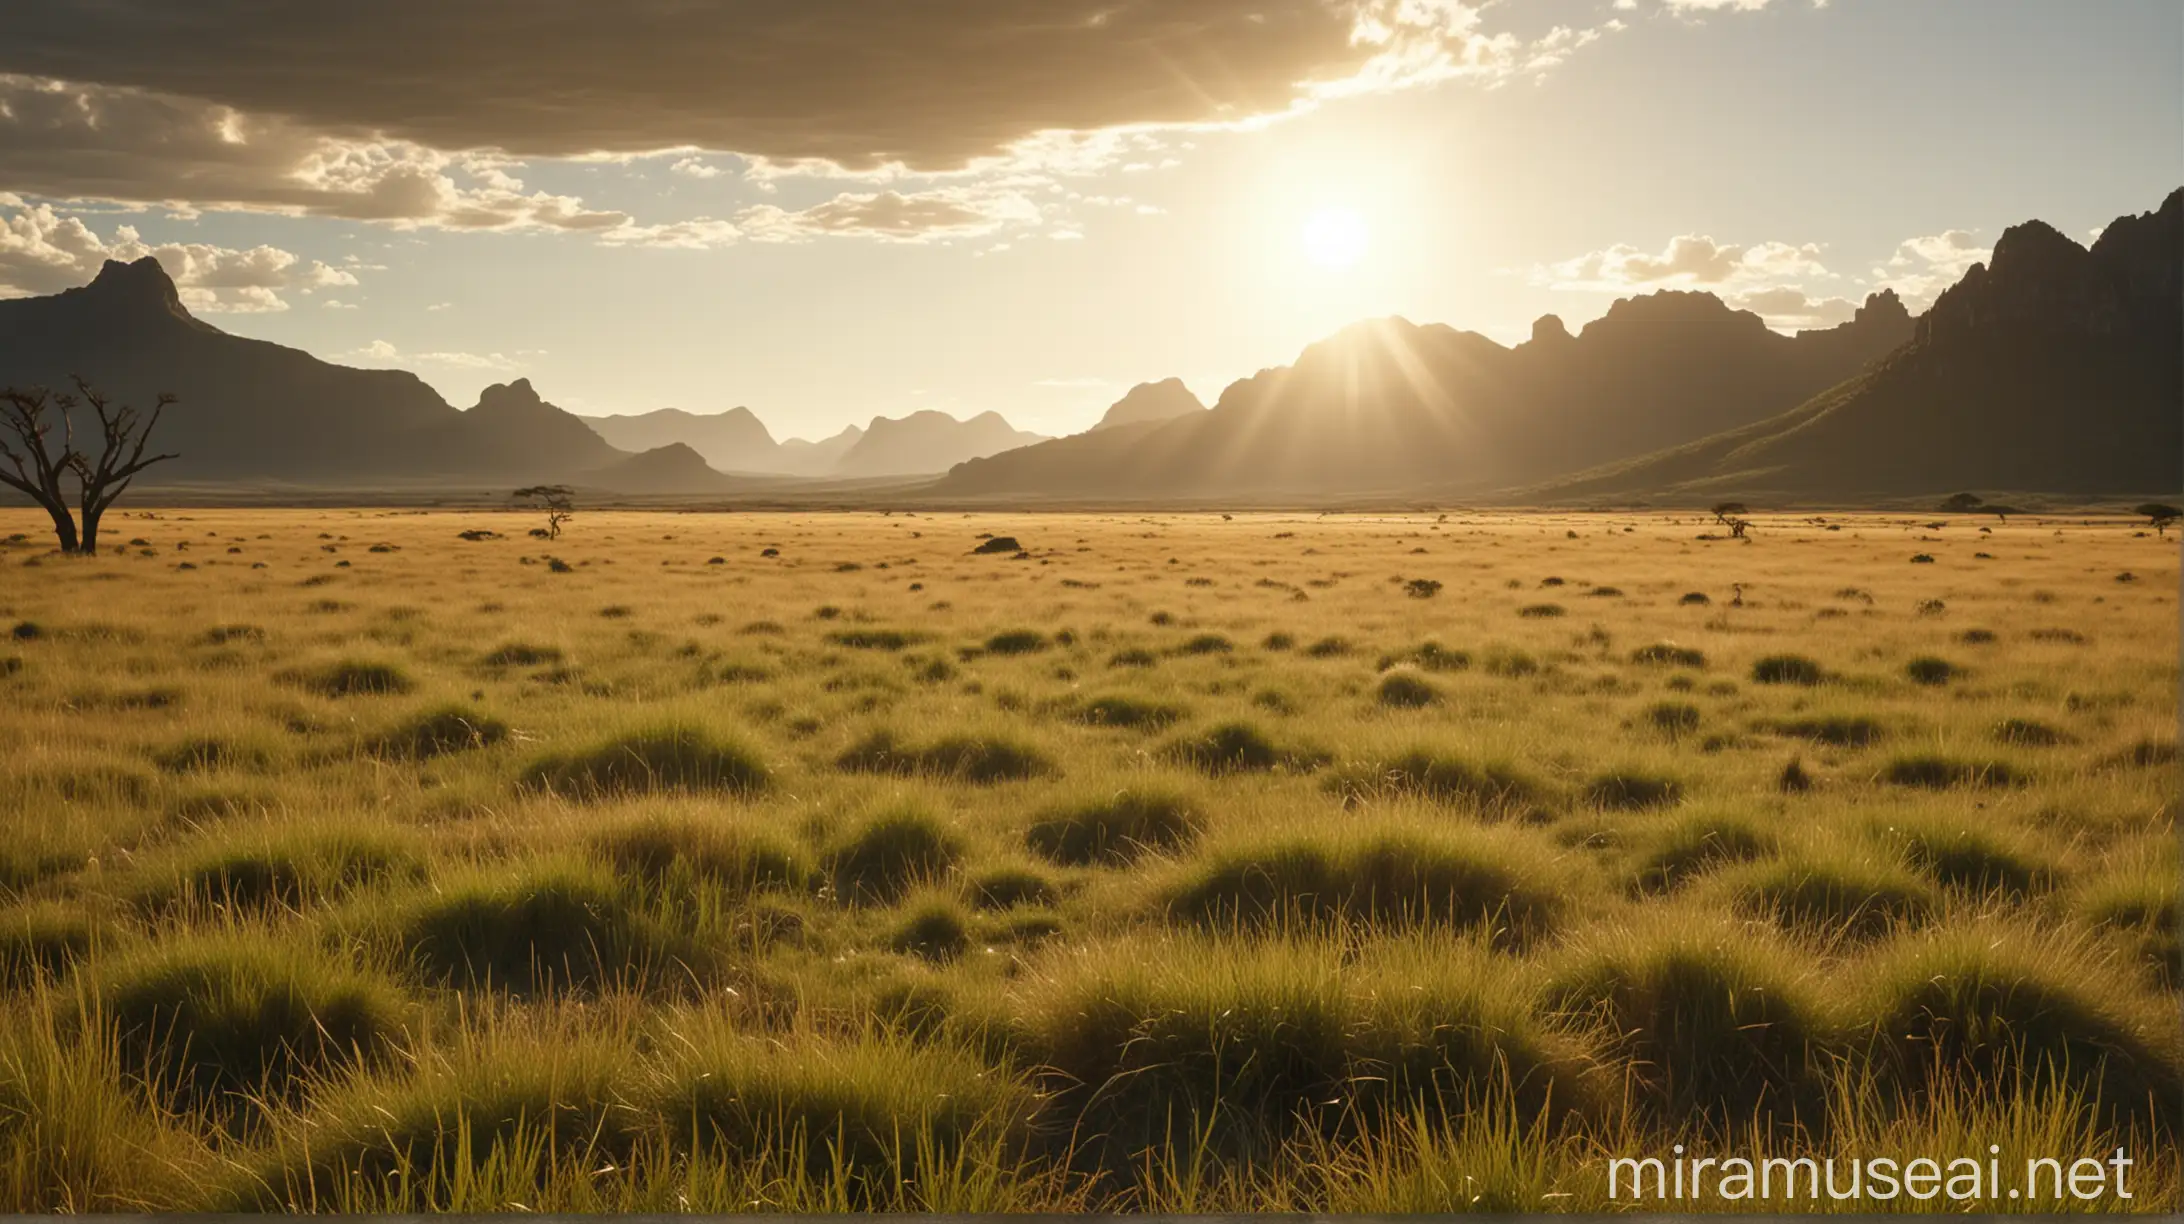 Vibrant Savanna Landscape with Majestic Mountains and Sunlight